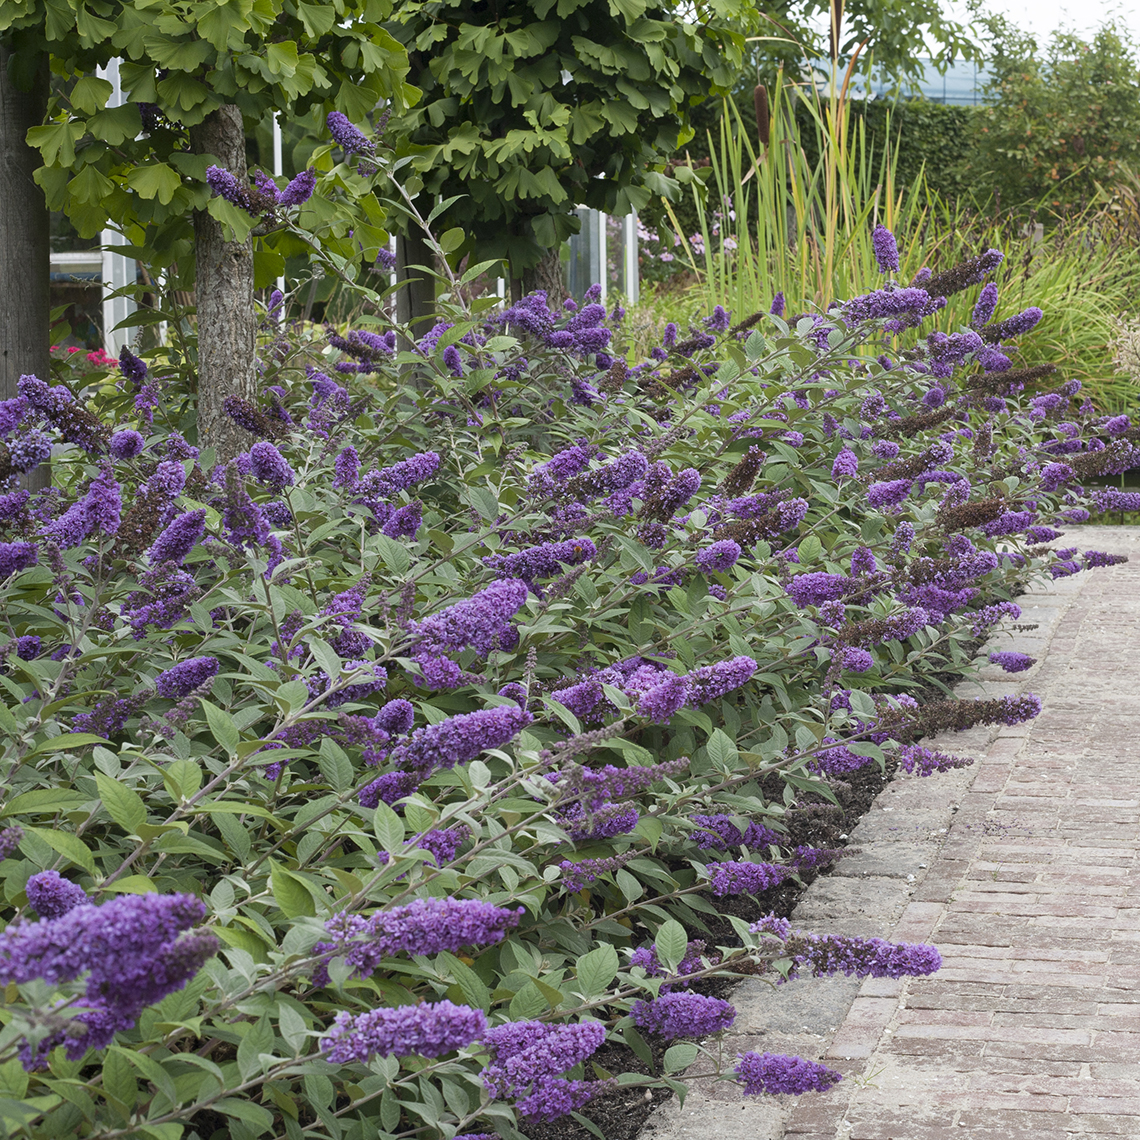 Mass planting of Lo & Behold Blue Chip Buddleia along walkway